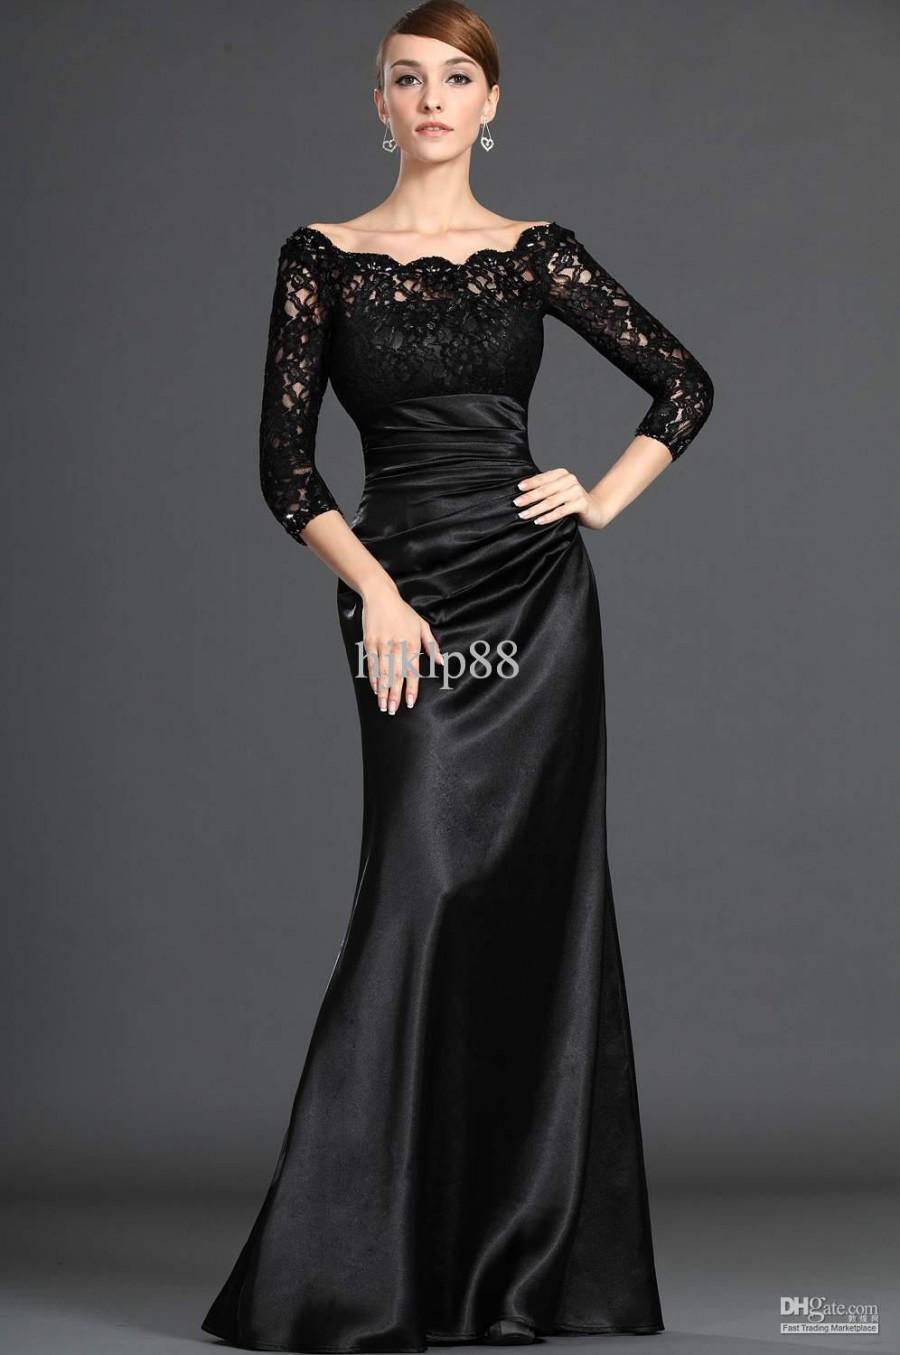 Hochzeit - 2014 New Custom Made Off-Shoulder 3/4Long Sleeve Black Lace Satin A-Line Mother Evening Dresses /Mother of the Bride Dresses Online with $89.26/Piece on Hjklp88's Store 